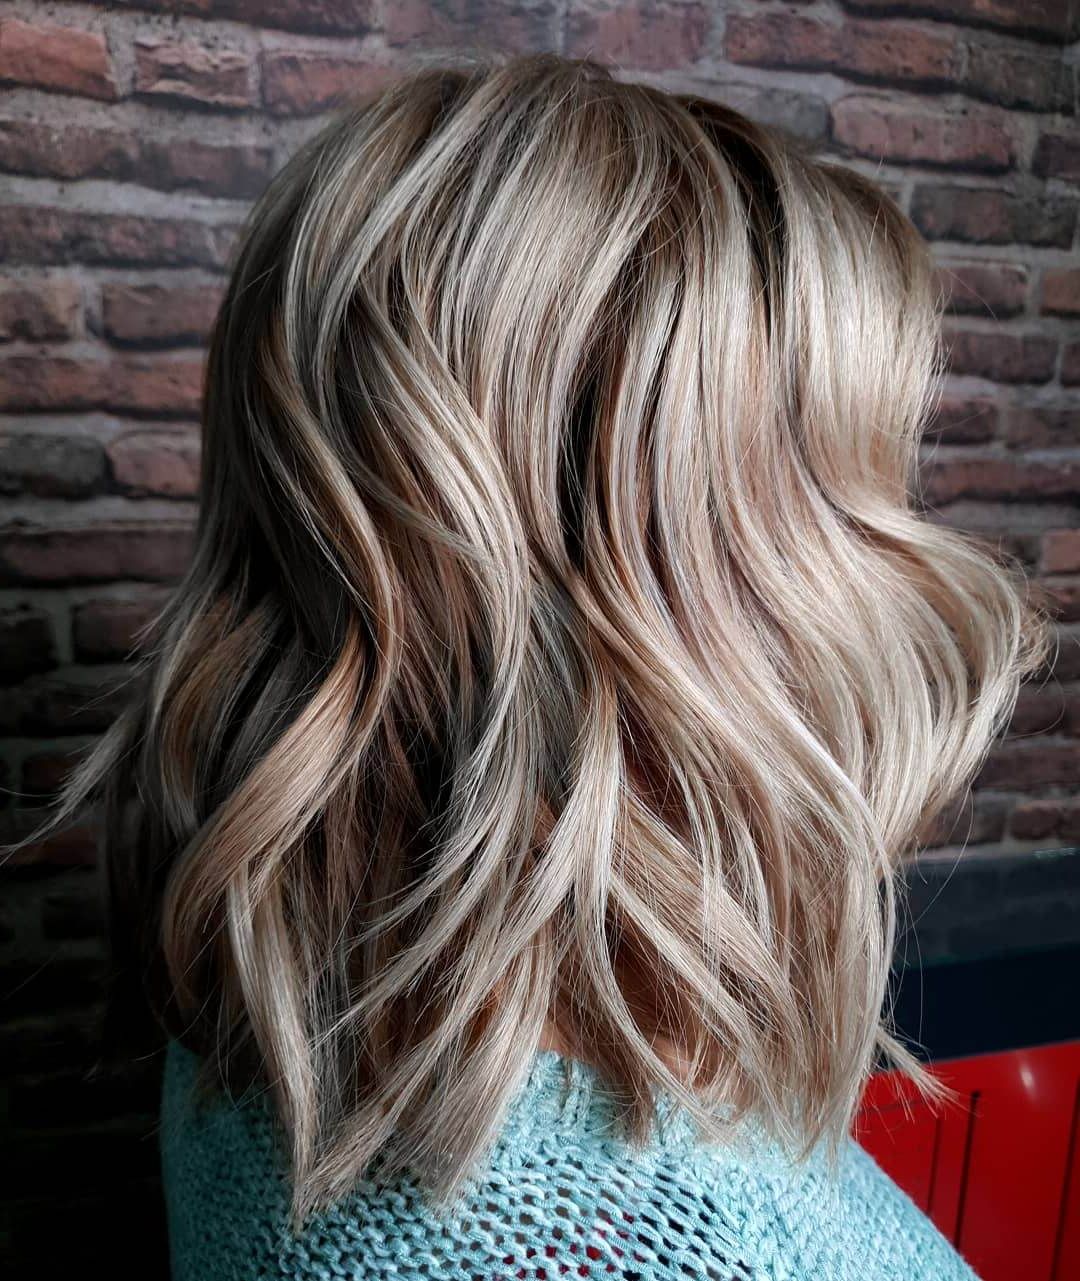 20 Fascinating Long Layered Bob Haircuts With White Blonde Curly Layered Bob Hairstyles (View 20 of 20)